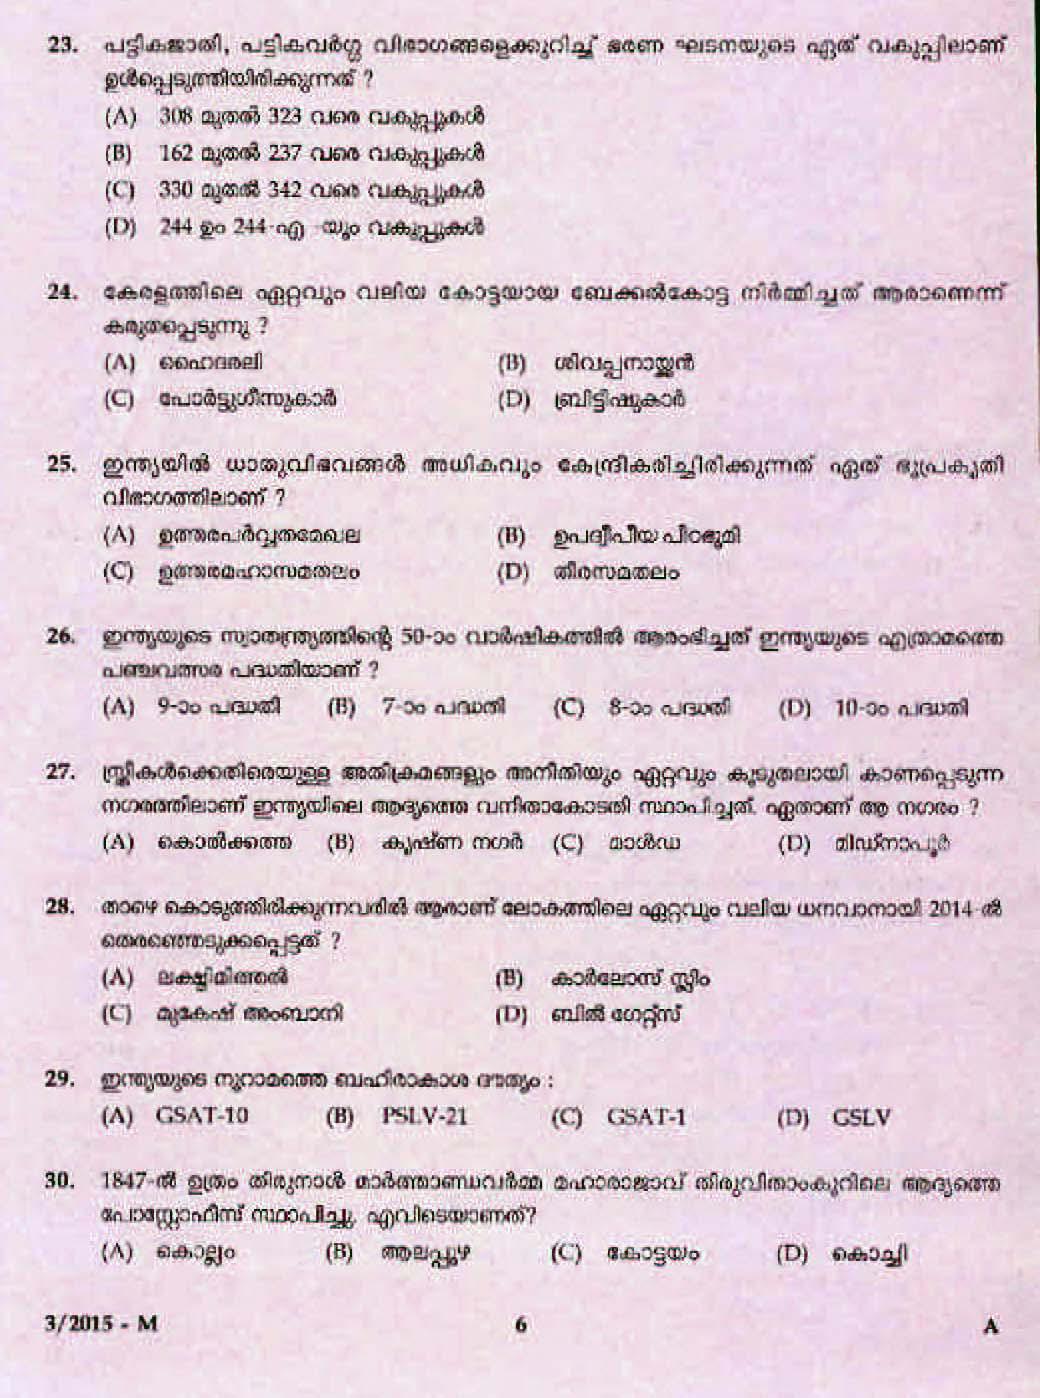 LD Clerk Thrissur District Question Paper Malayalam 2015 Paper Code 32015 M 4